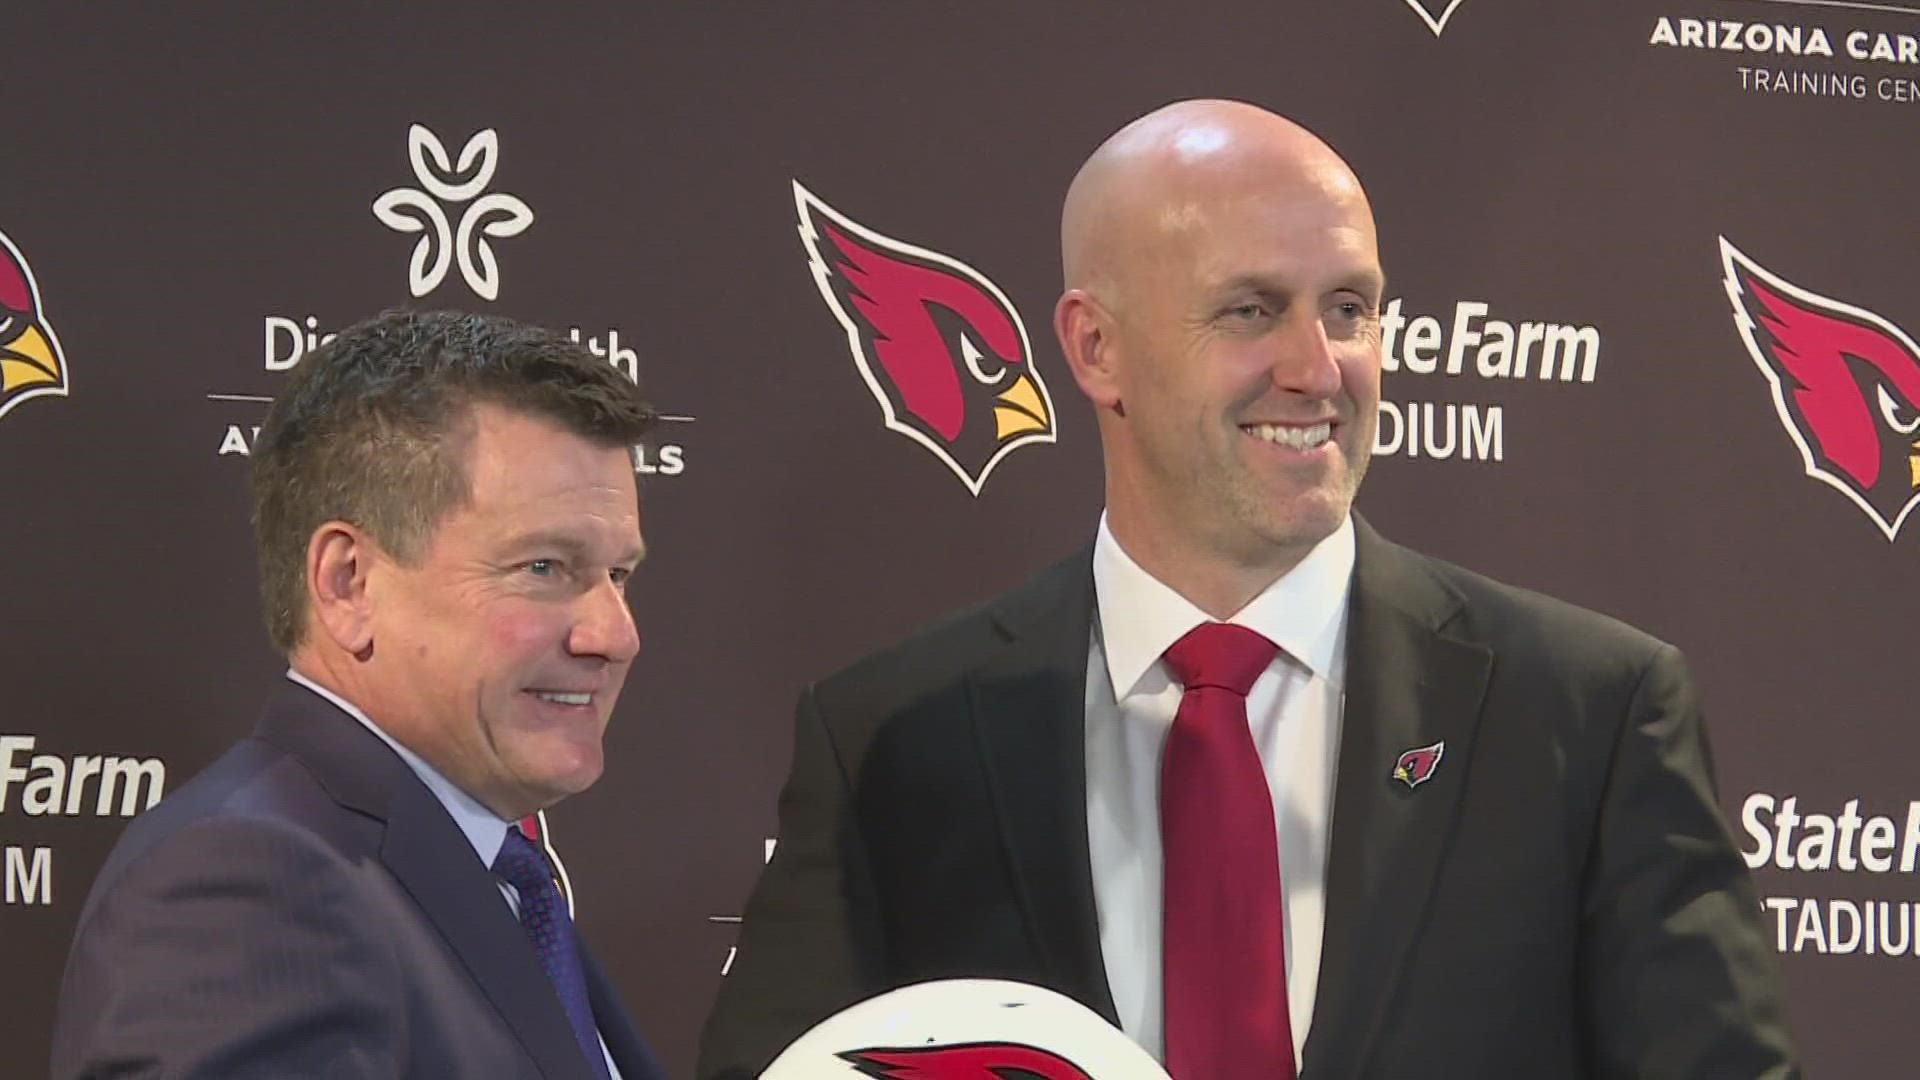 New Arizona Cardinals General Manager Monti Ossenfort was introduced to the media Tuesday during a morning news conference. Here's what he had to say.